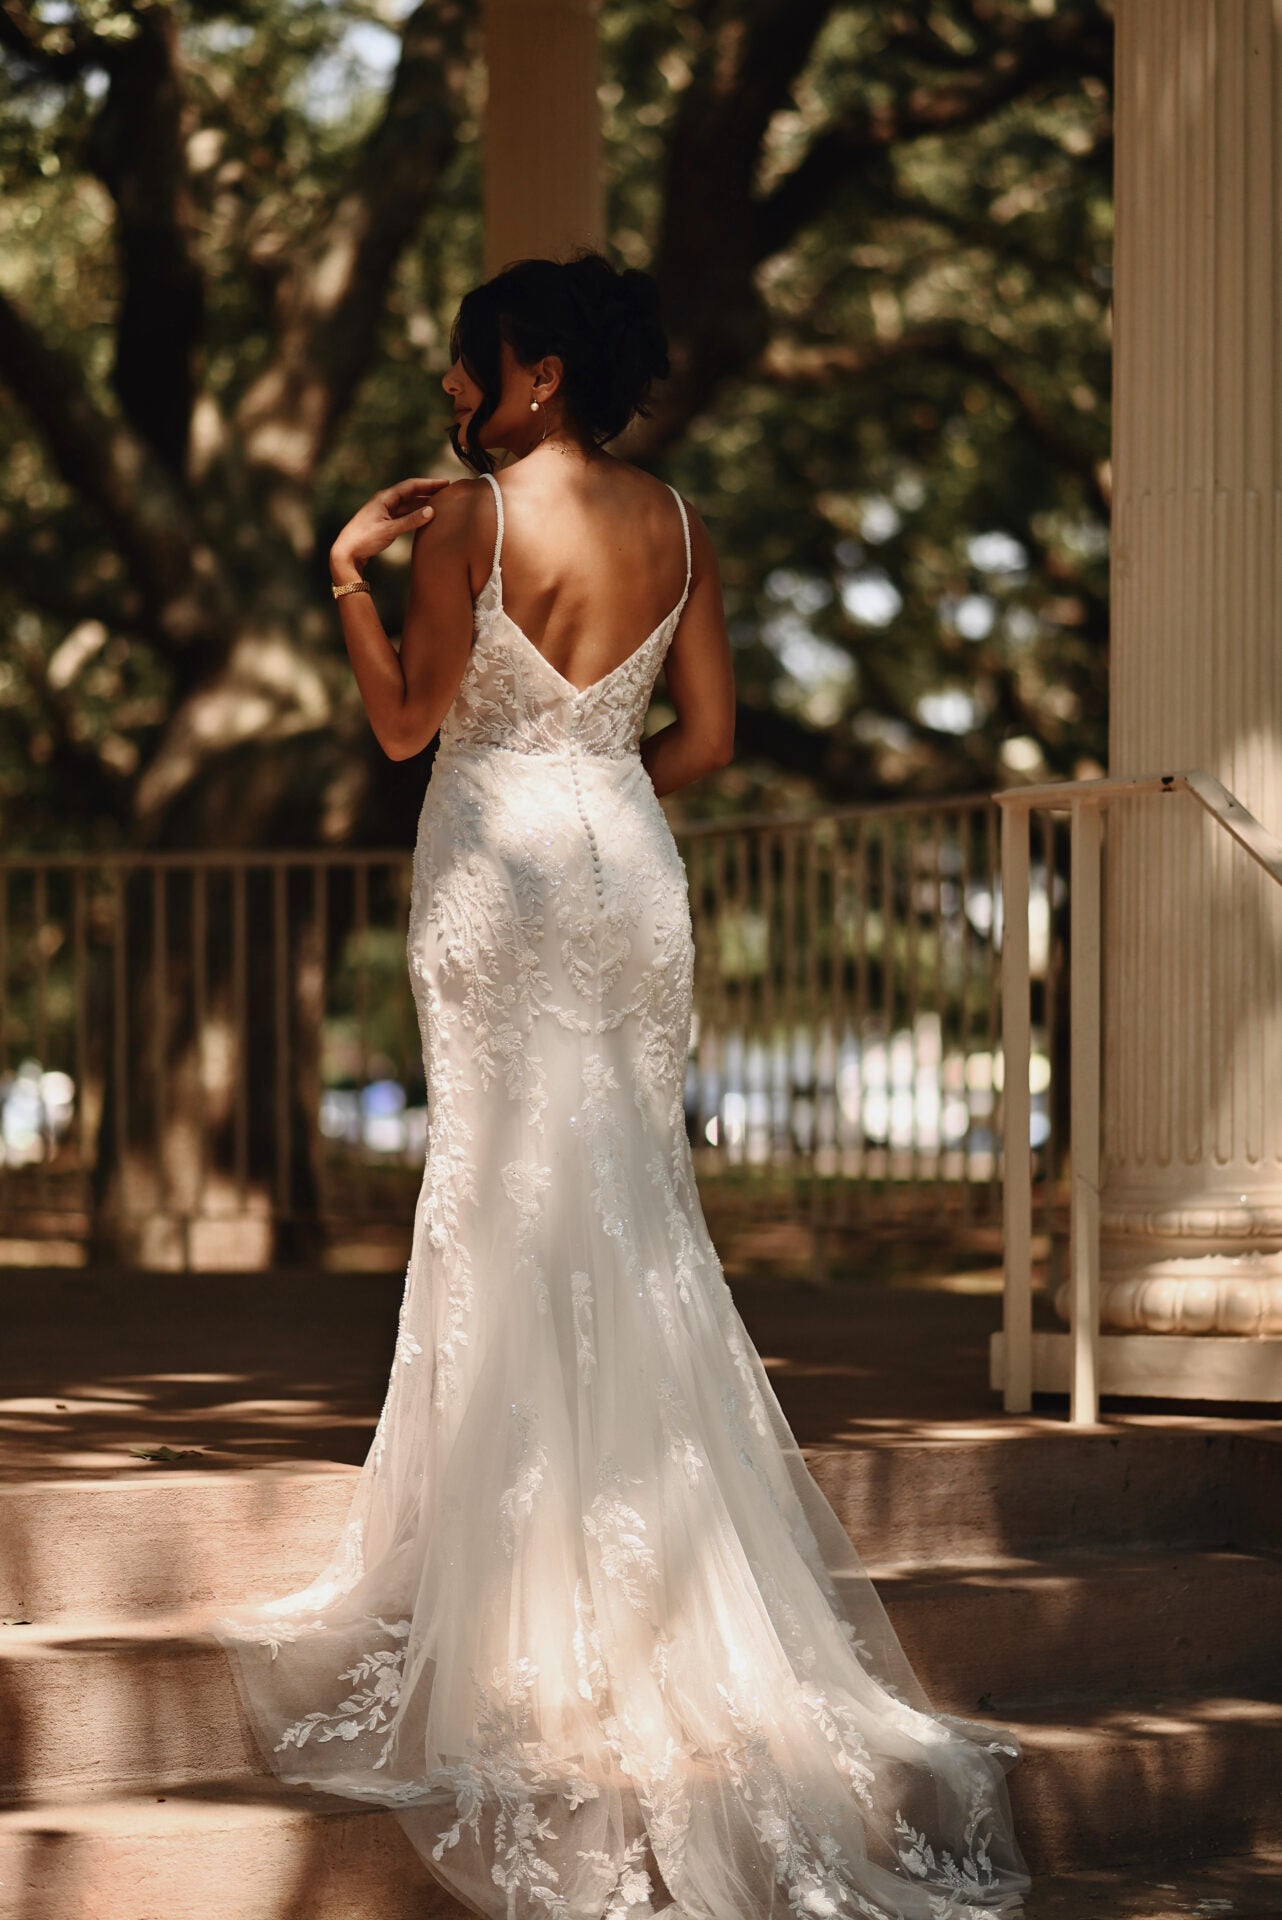 Beaded Lace Fit-and-Flare Gown With Corset Bodice by Essense of Australia - Image 2